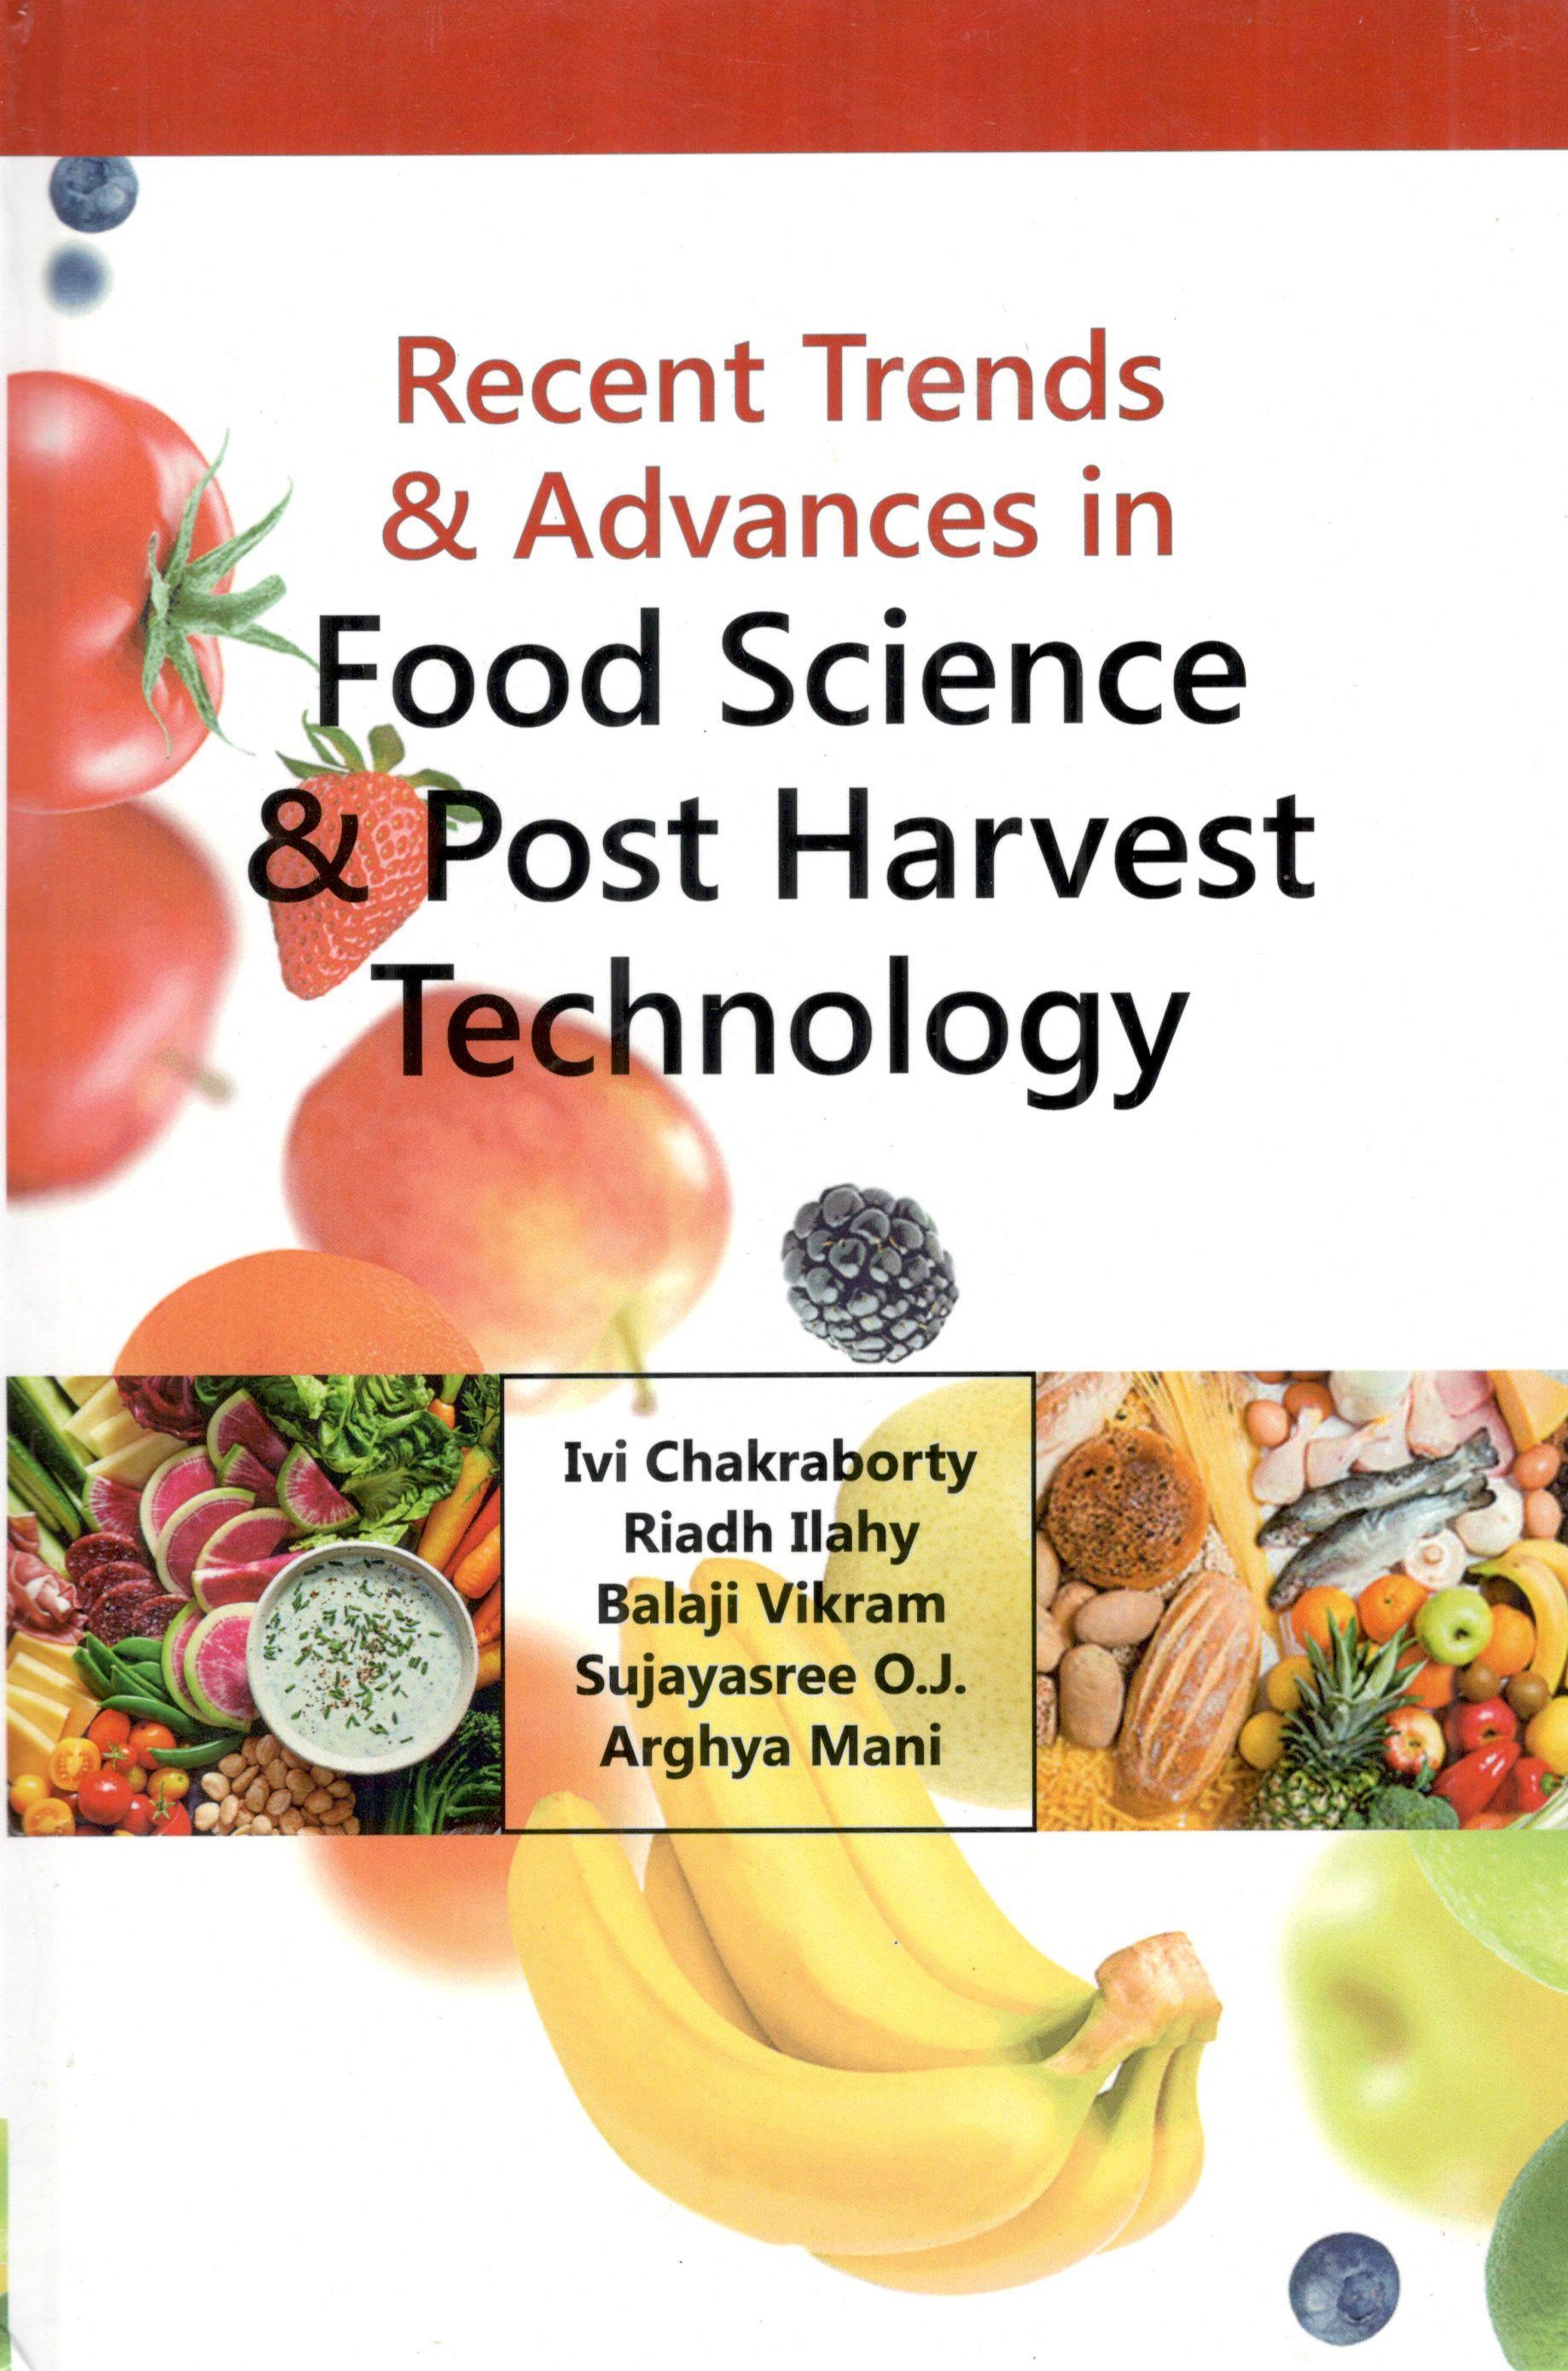 Recent Trends & Advances in Food Science & Post Harvest Technology